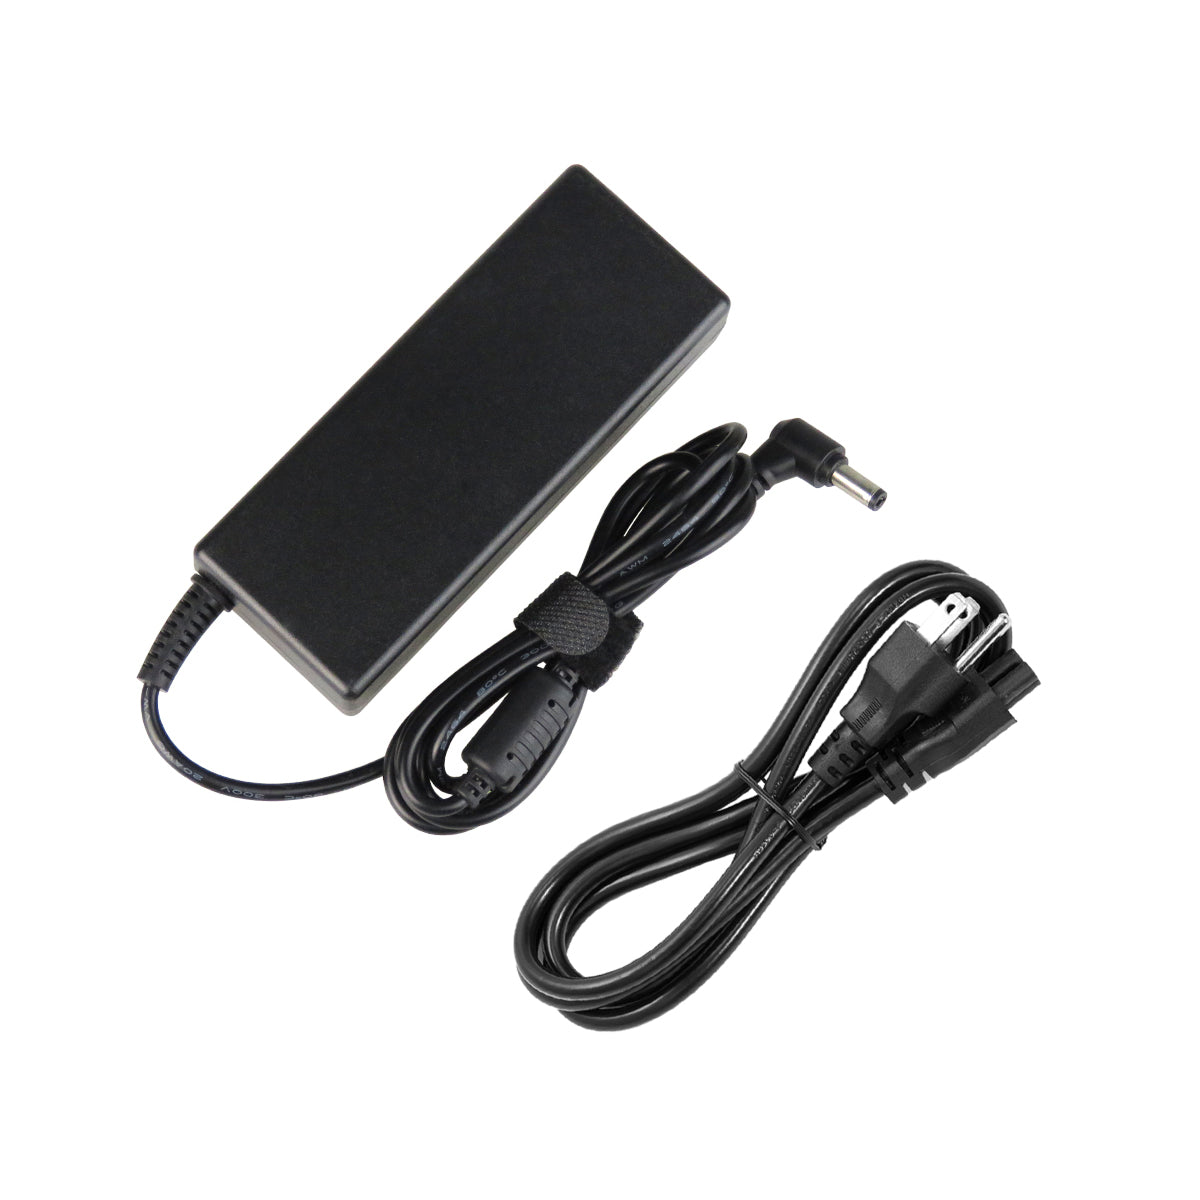 AC Adapter Charger for ASUS A45VD Notebook.